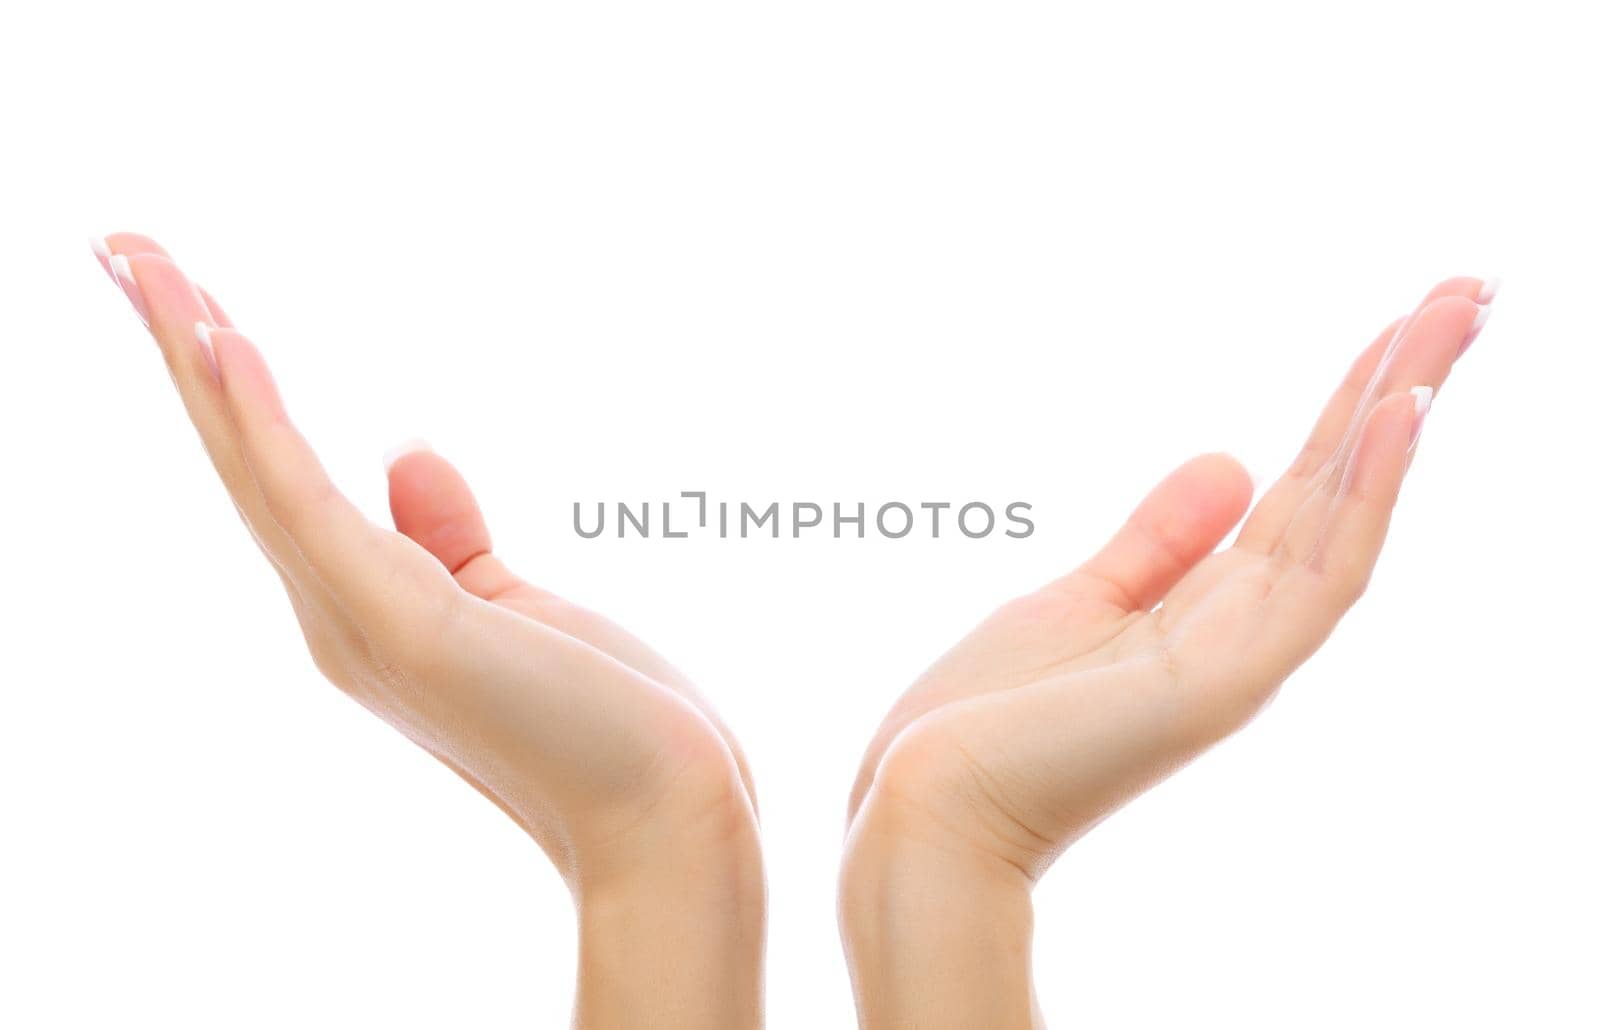 Female hands on white background